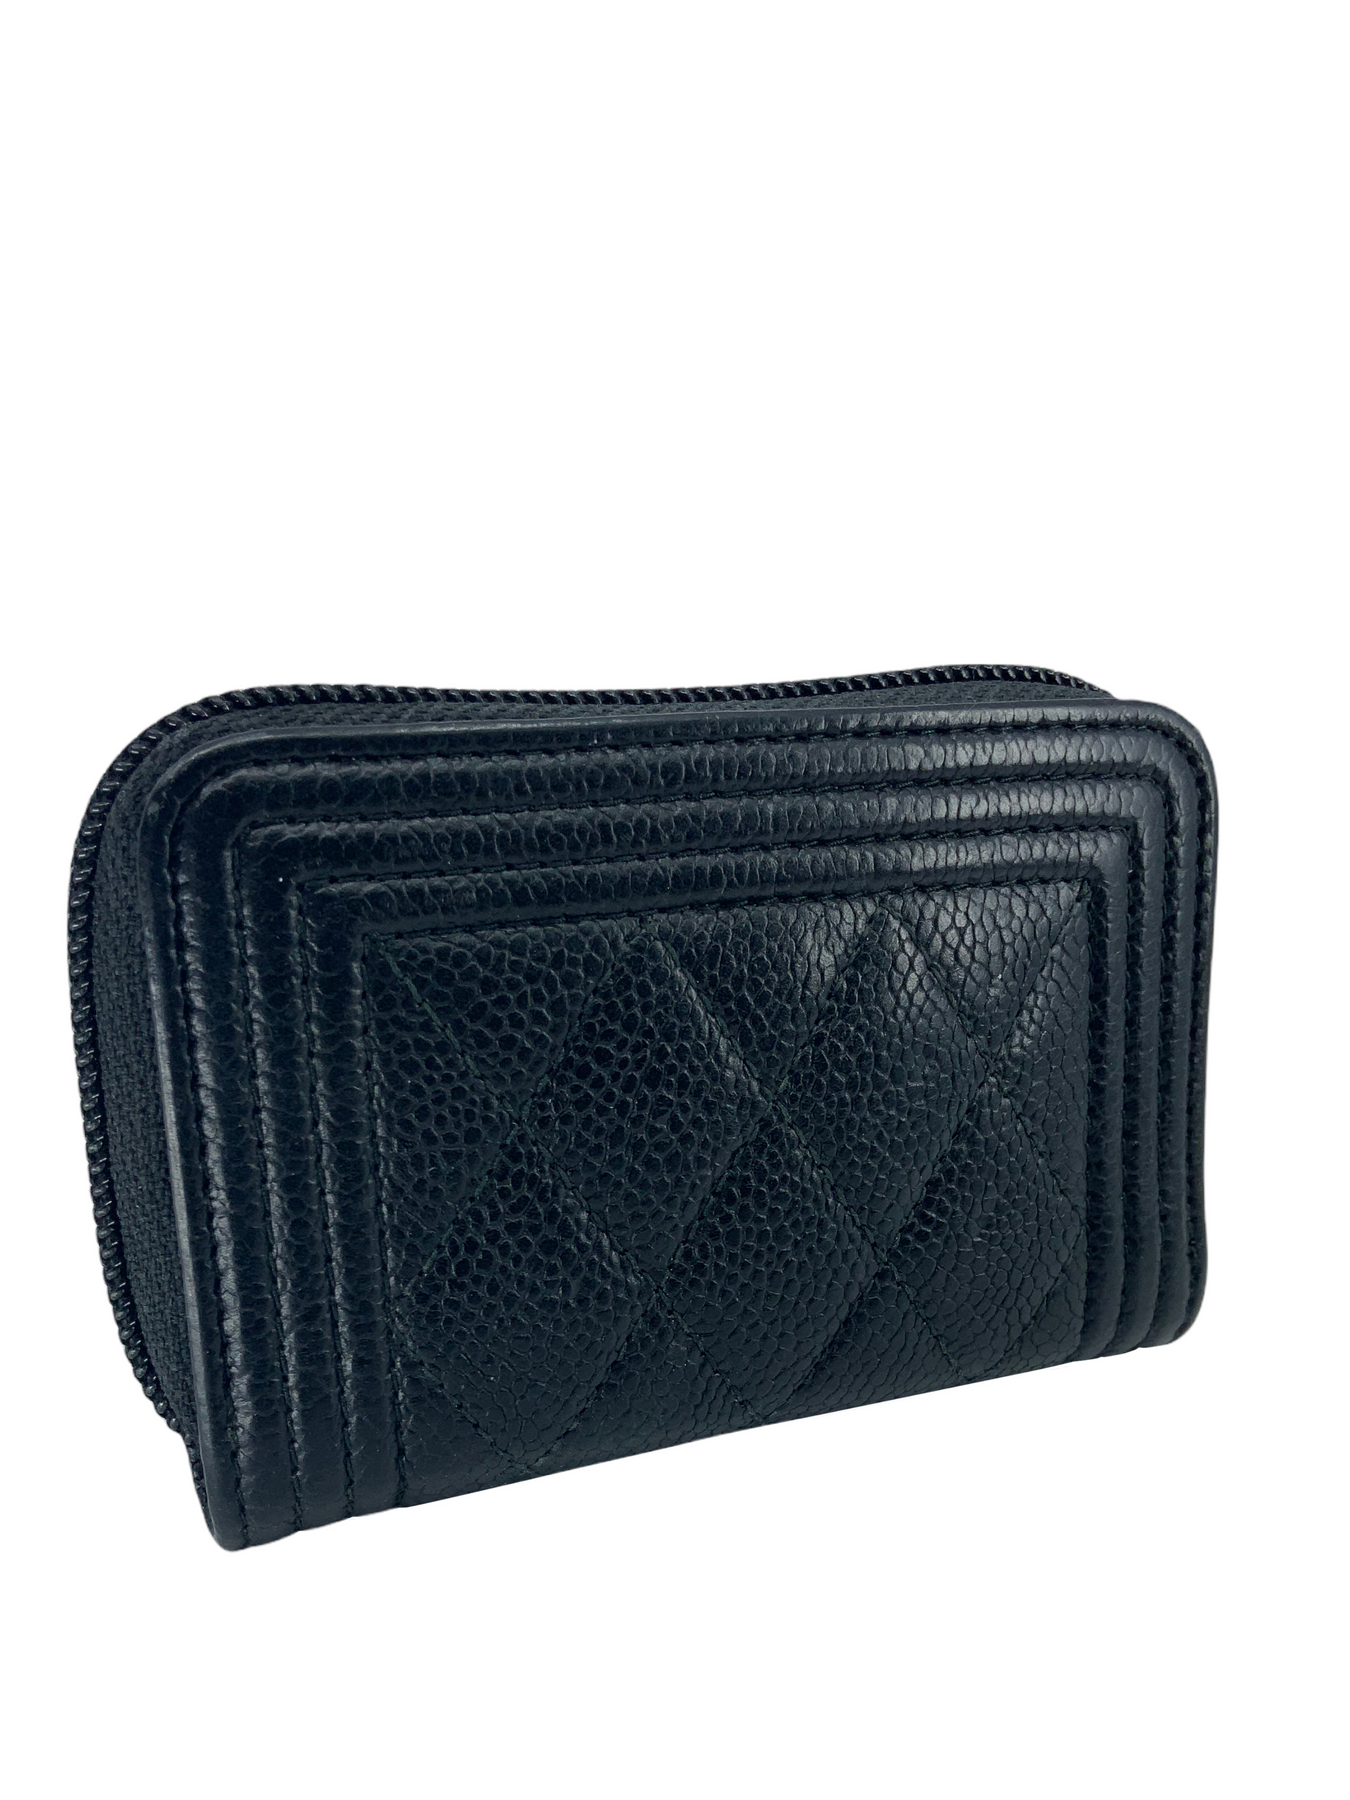 Chanel Boy Zip Around Coin Purse Wallet Quilted Caviar Gold-Tone